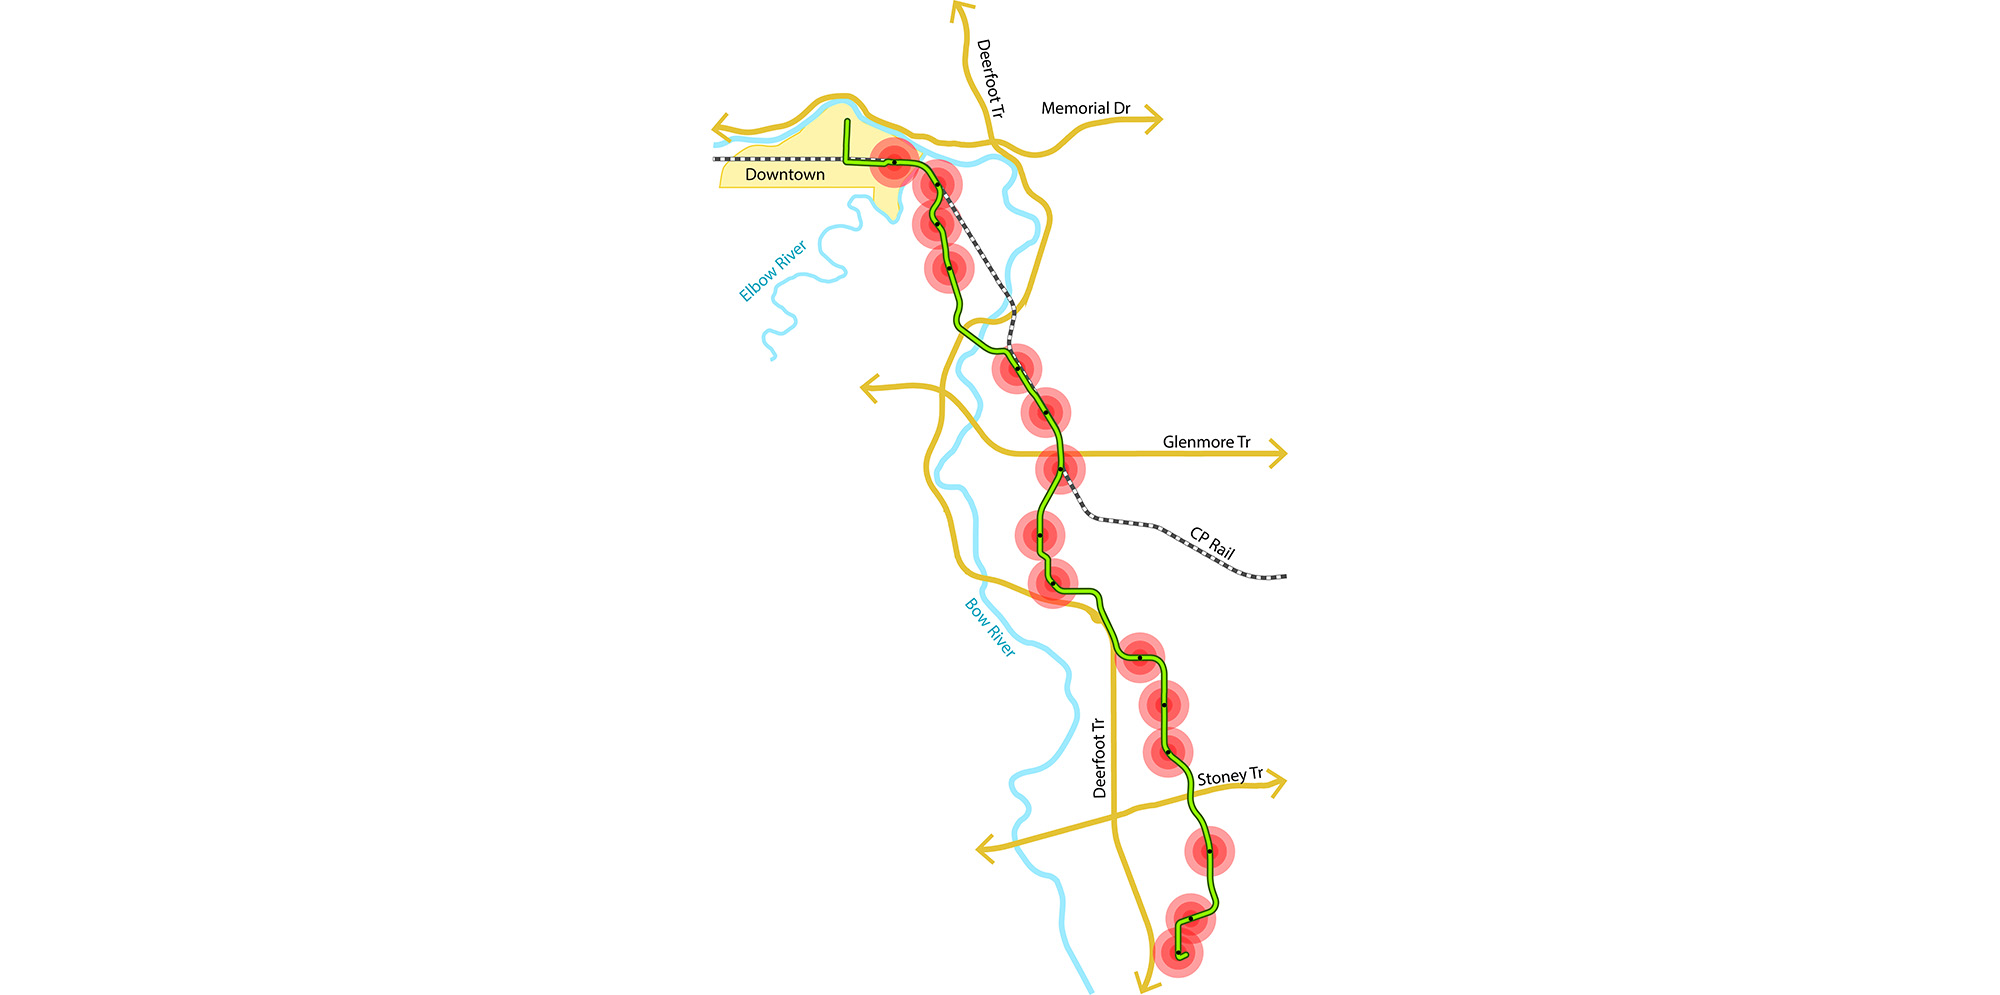 Map of Greenline in Calgary. Algonquin College Student Common Stormwater Management Concept. For full text, download project PDF below